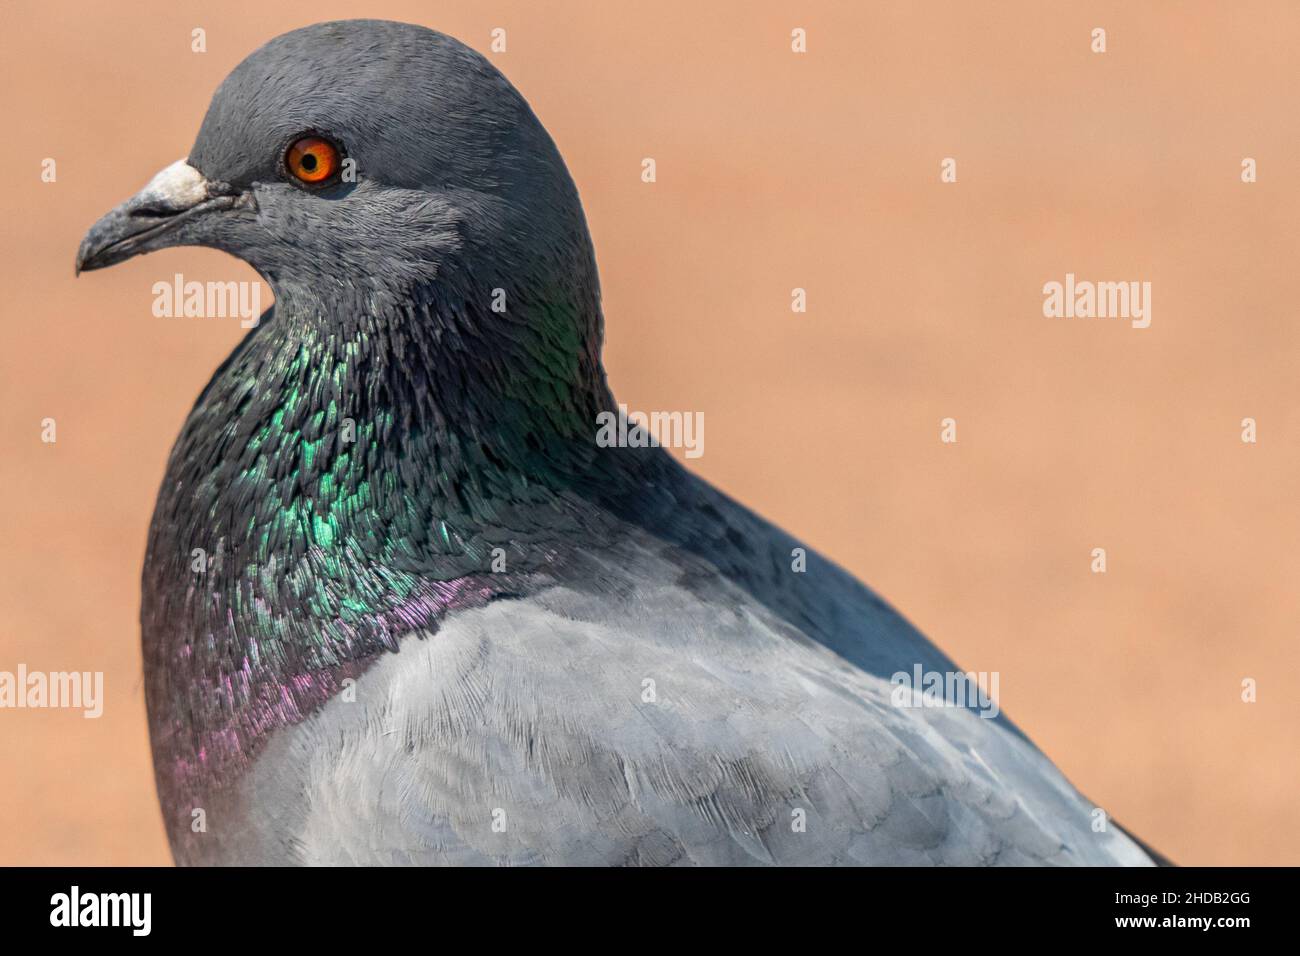 portrait of a pigeon Stock Photo